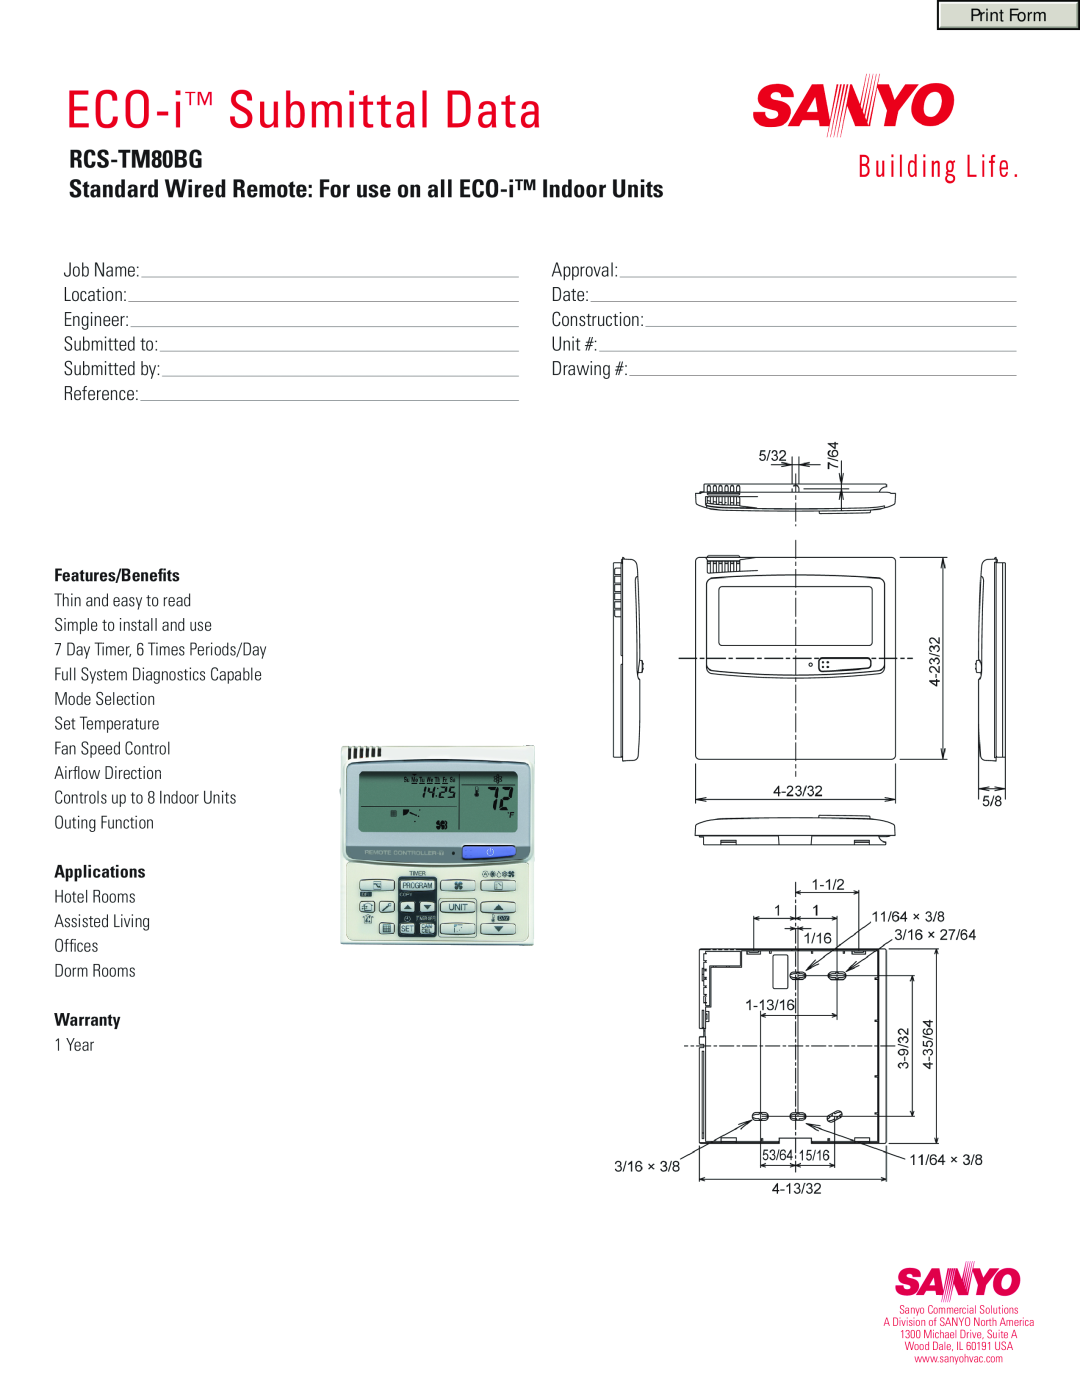 Sanyo warranty ECO-i Submittal Data, RCS-TM80BG Standard Wired Remote For use on all ECO-i Indoor Units, Print Form 